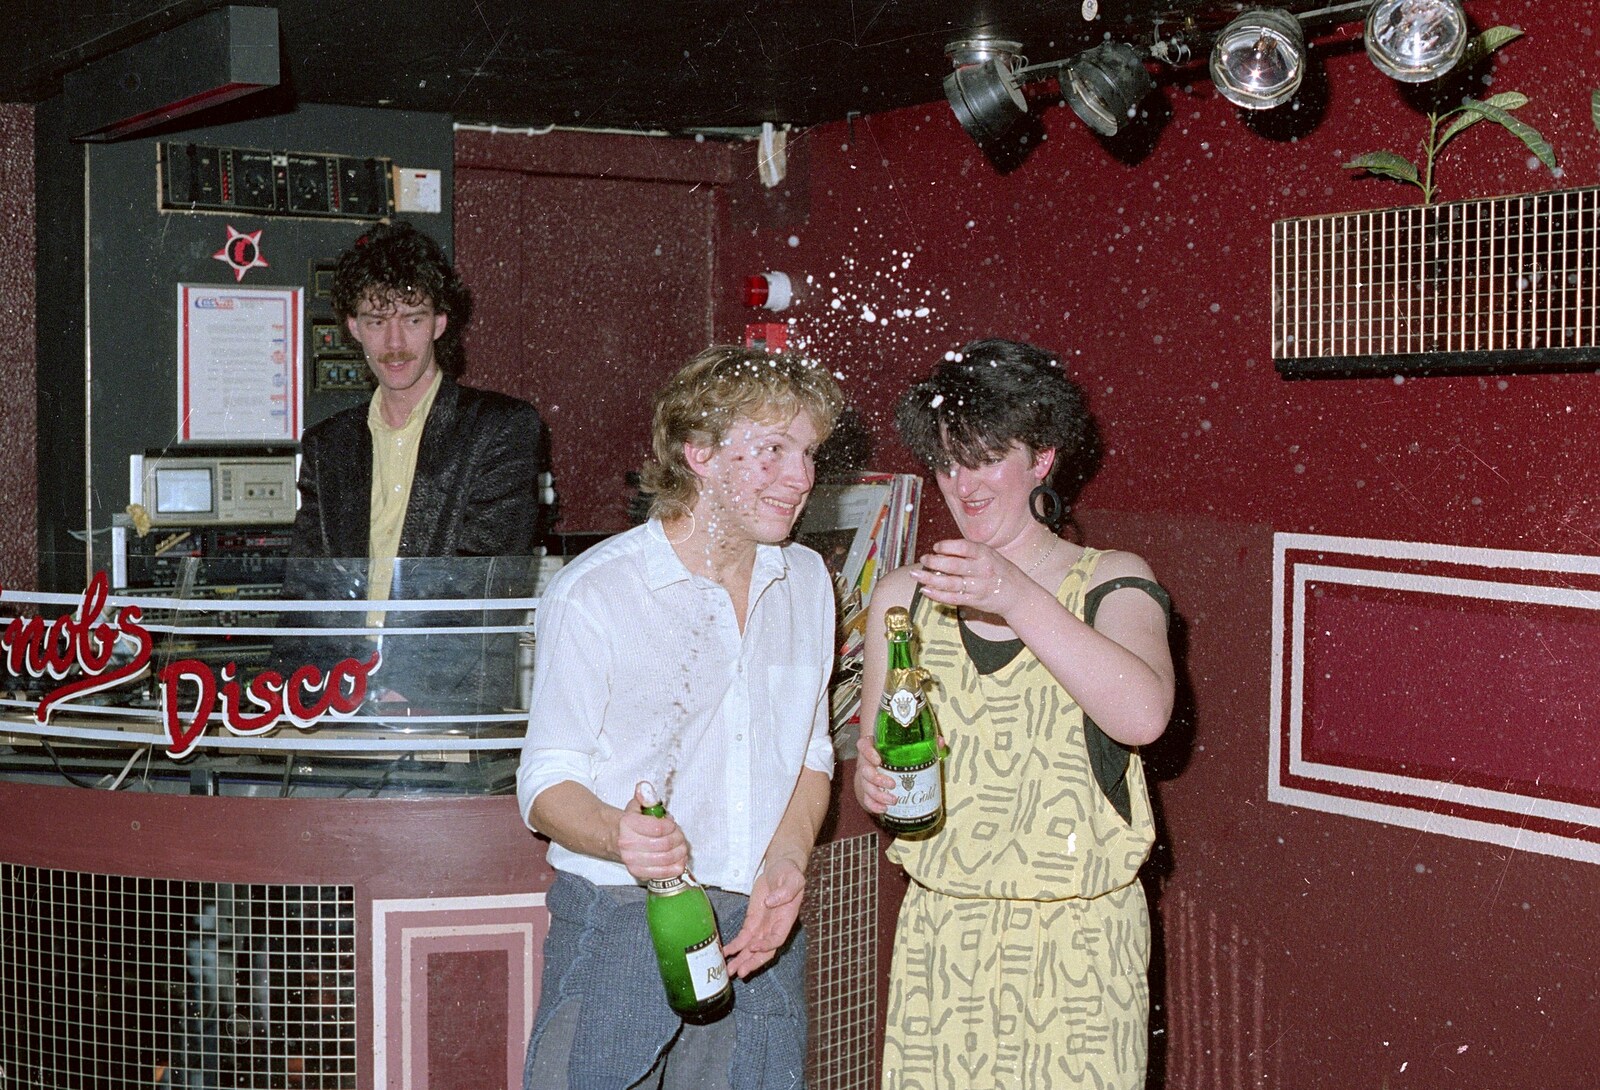 More fizz from Uni: A Party in Snobs Nightclub, Mayflower Street, Plymouth - 18th October 1986